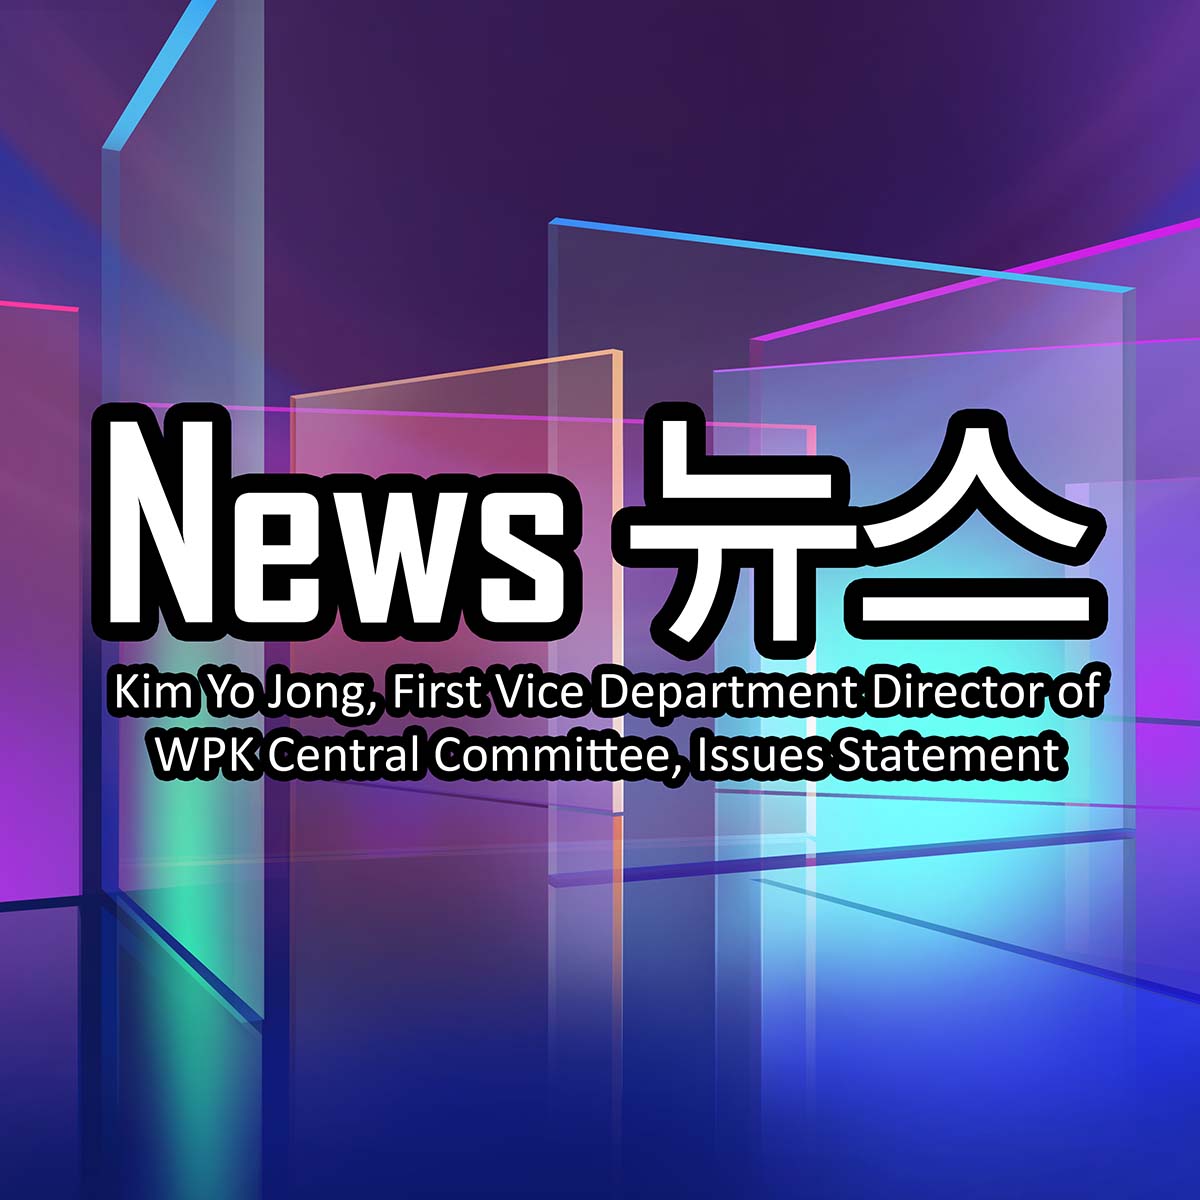 Kim Yo Jong, First Vice Department Director of WPK Central Committee, Issues Statement